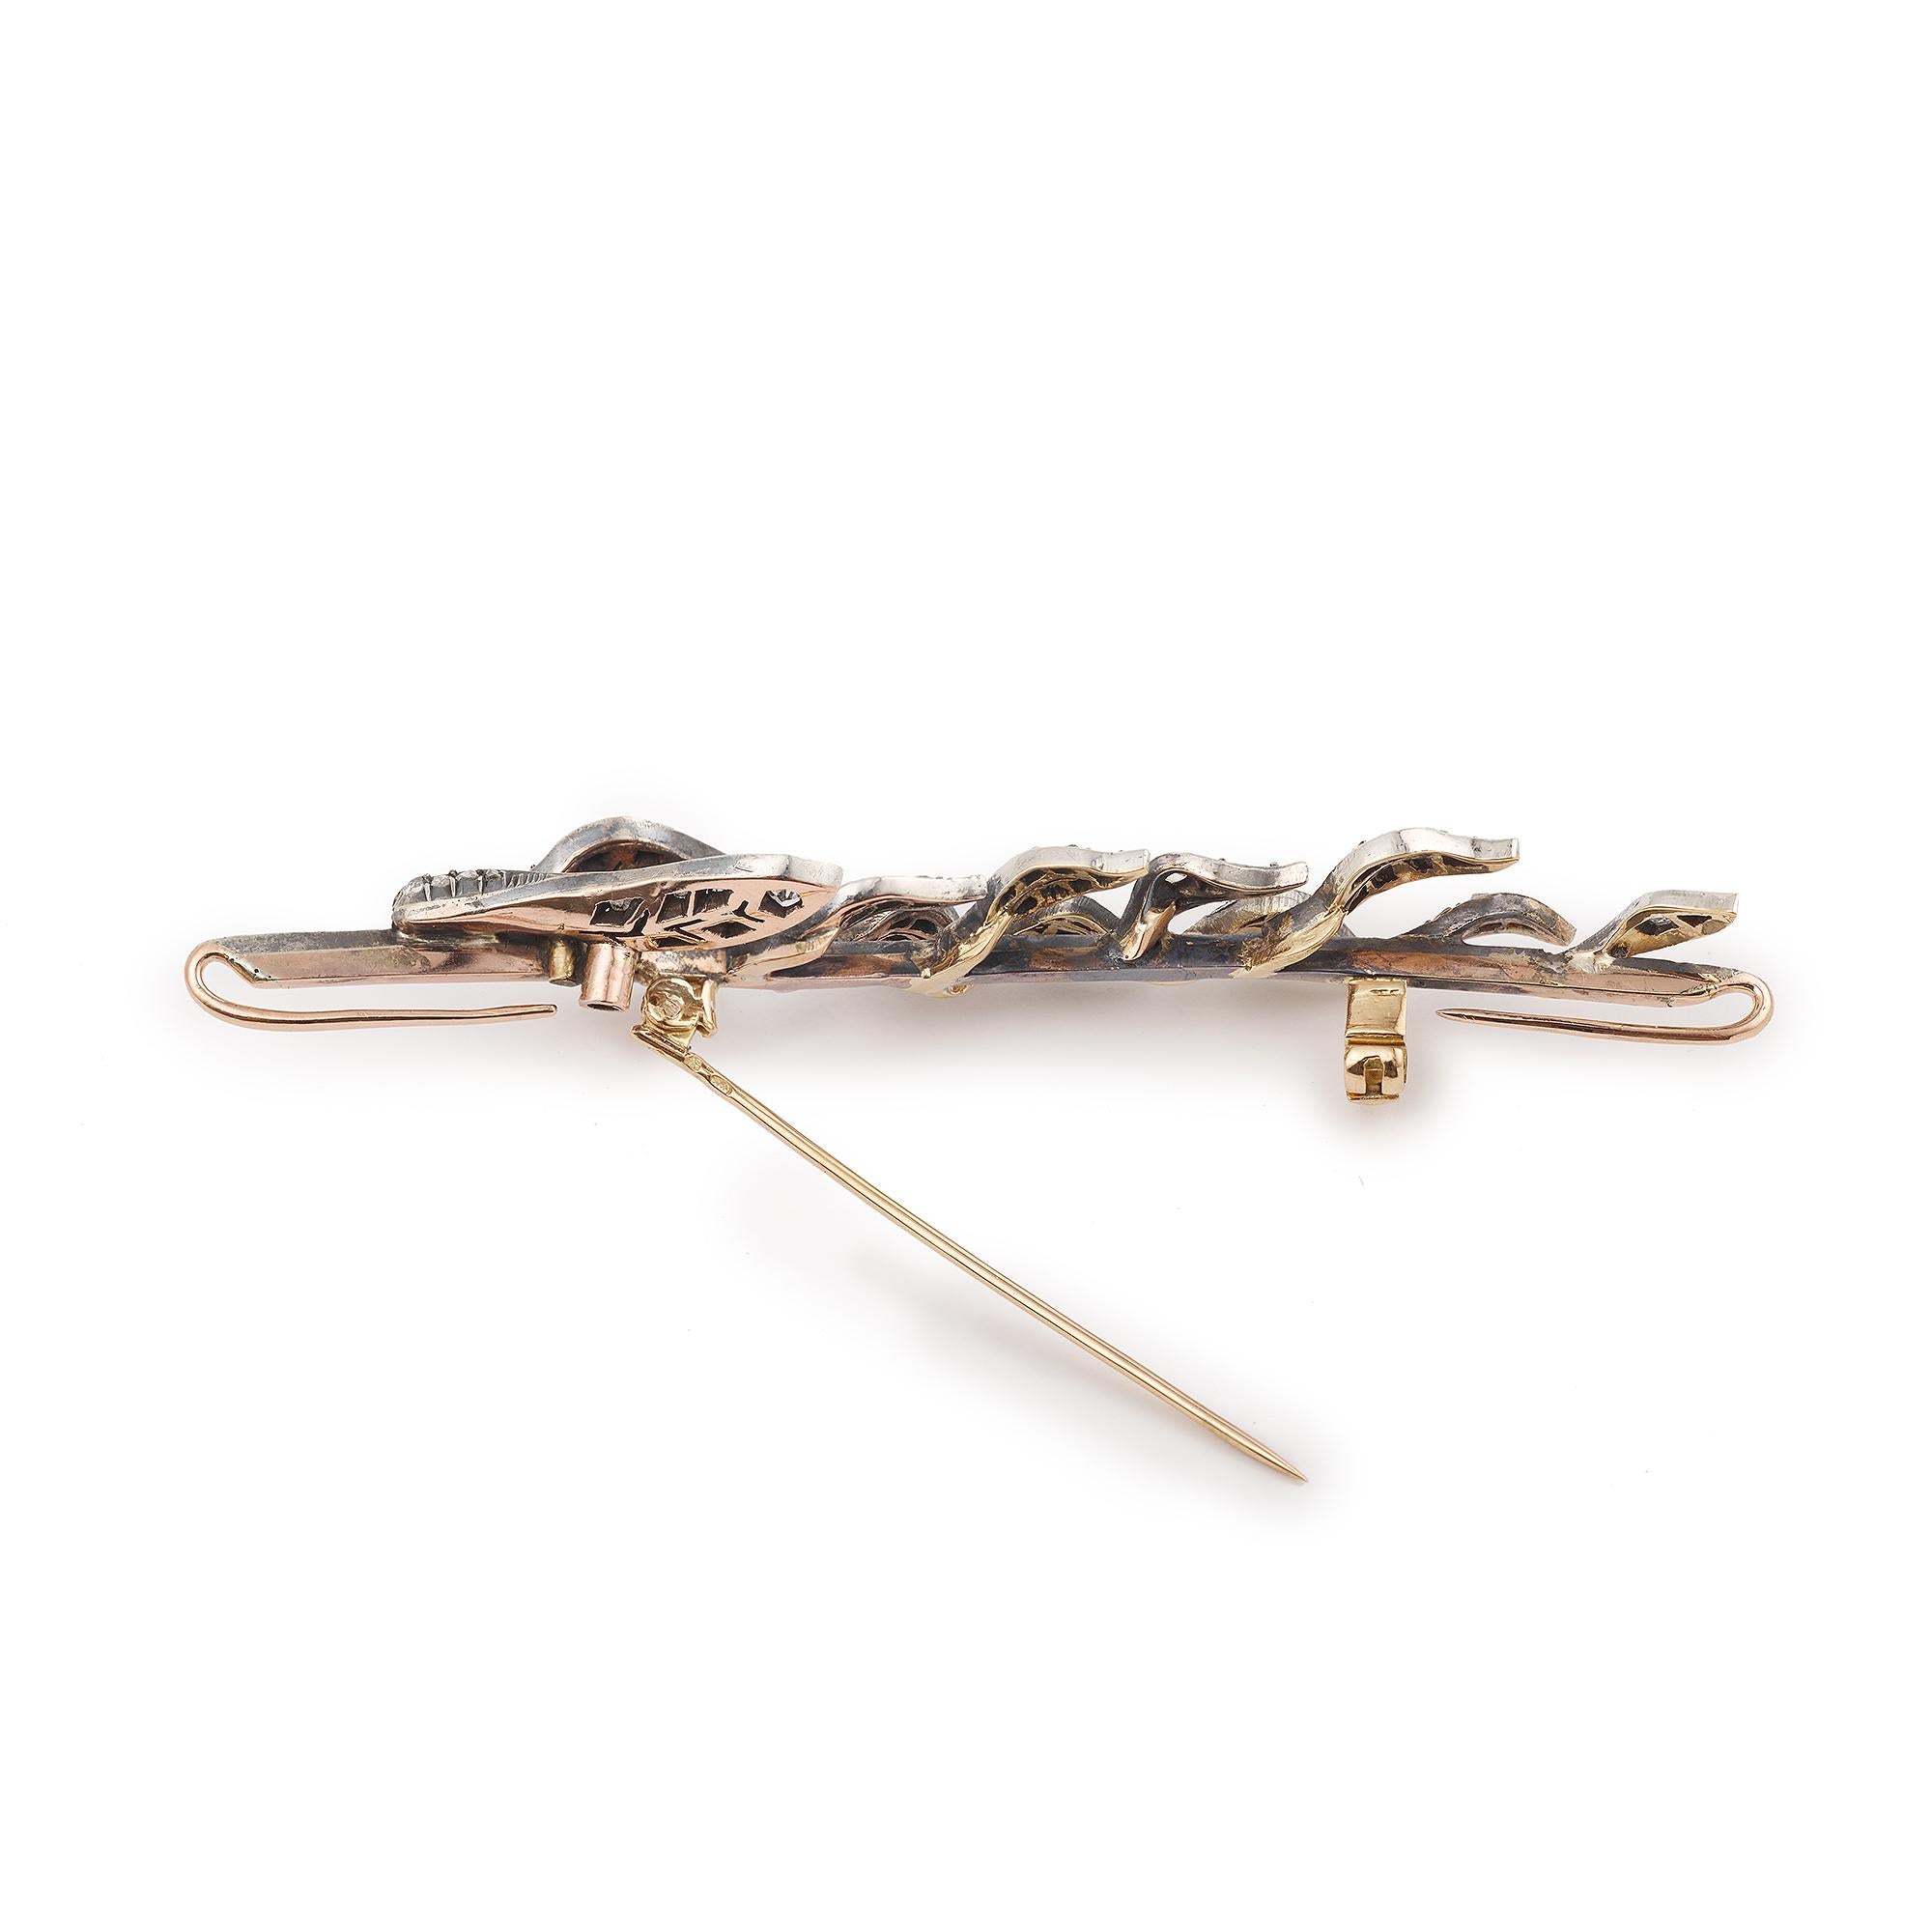 Very nice brooch in yellow gold and silver in the shape of a small branch. It is set with small rose-cut diamonds.

Dimensions : 84.53 x 21.17 mm (3.328 x 0.833 inches)

Weight : 11.60 g

Total approximate weight of the 74 diamonds: 0.75 carats

18